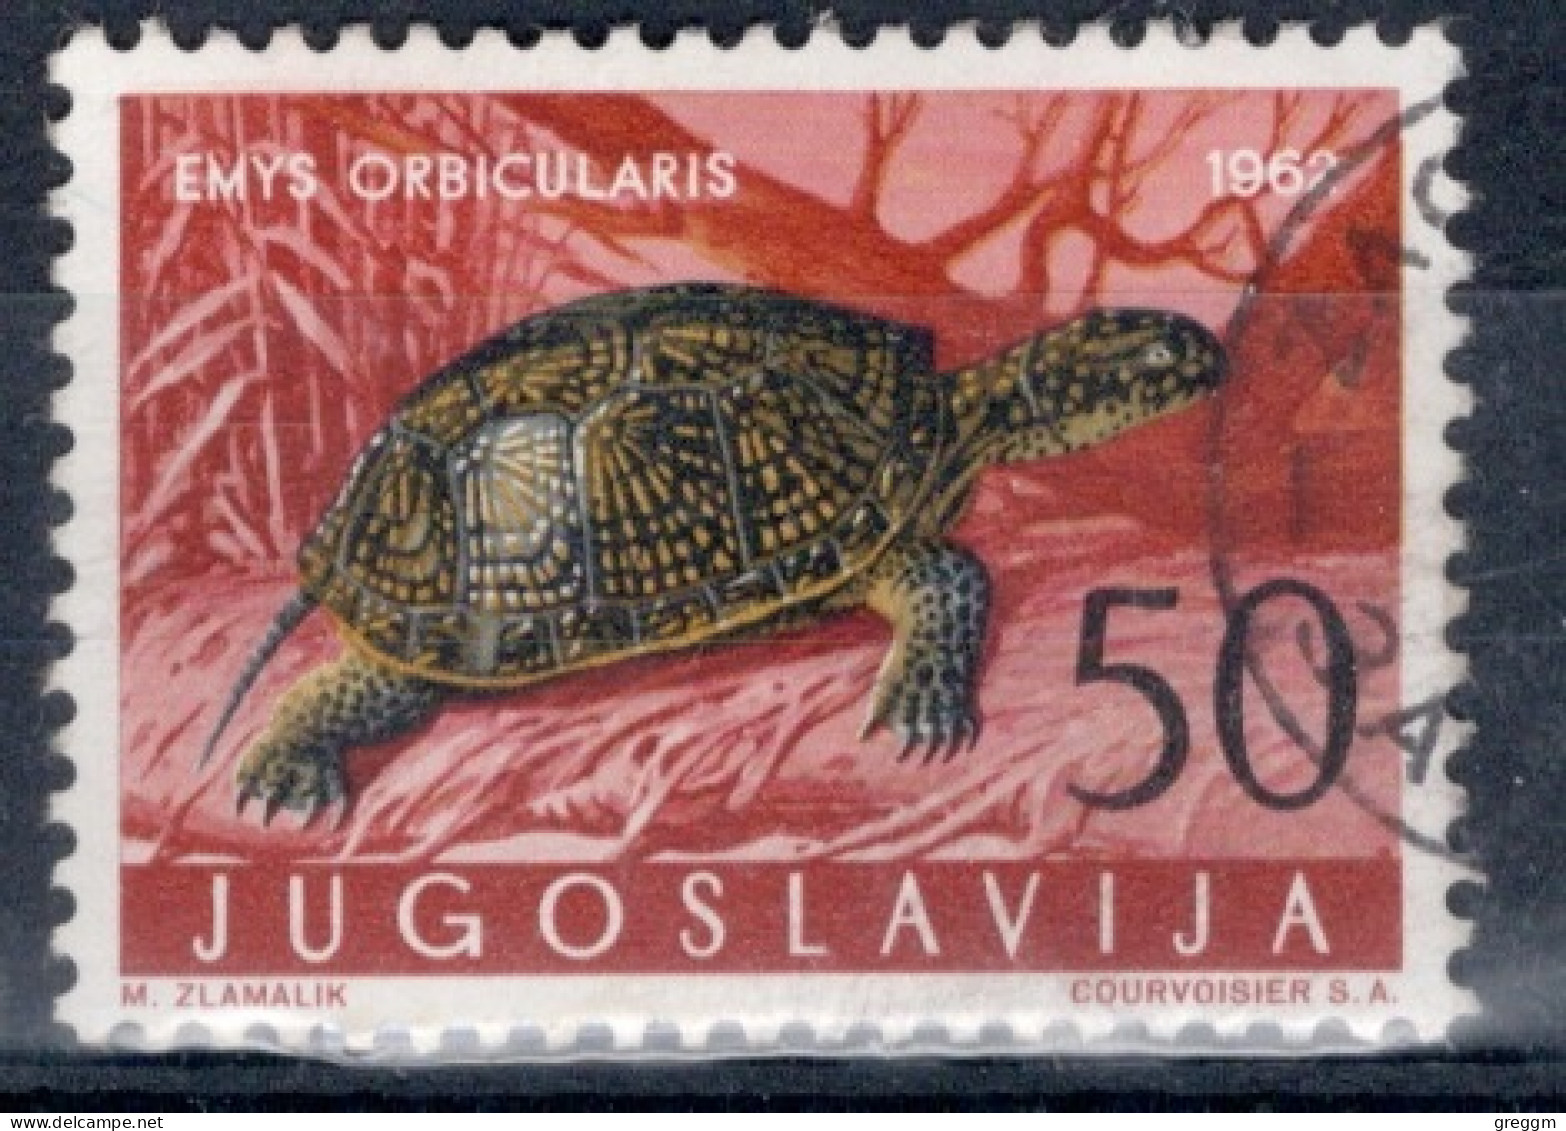 Yugoslavia 1962 Single Amphibians & Reptiles In Fine Used. - Used Stamps